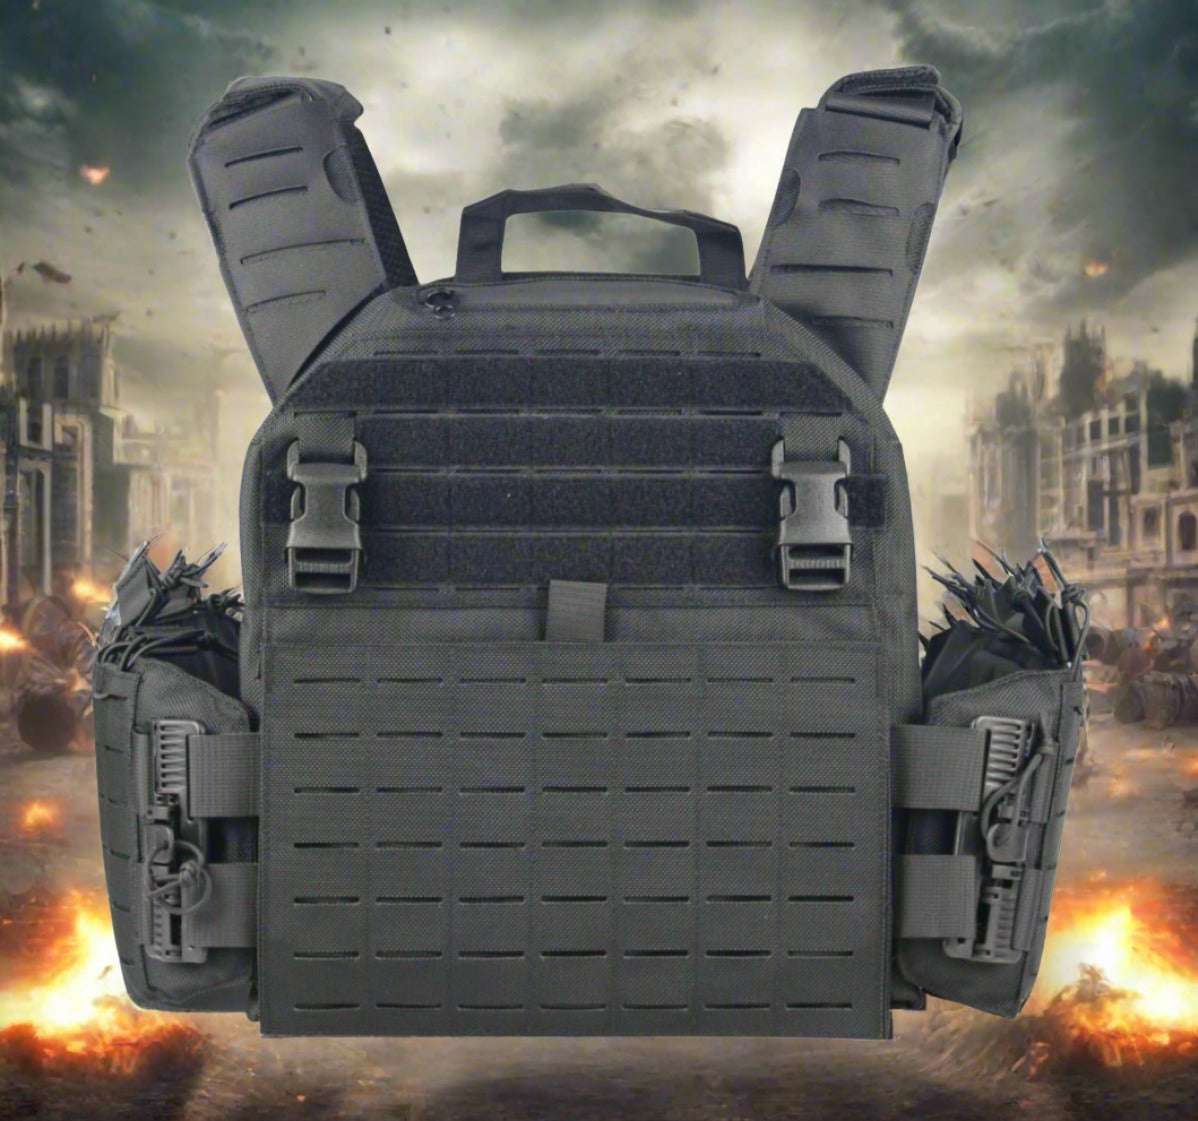 GTS Bulletproof Vests and Carriers - Gilliam Technical Services, Inc.